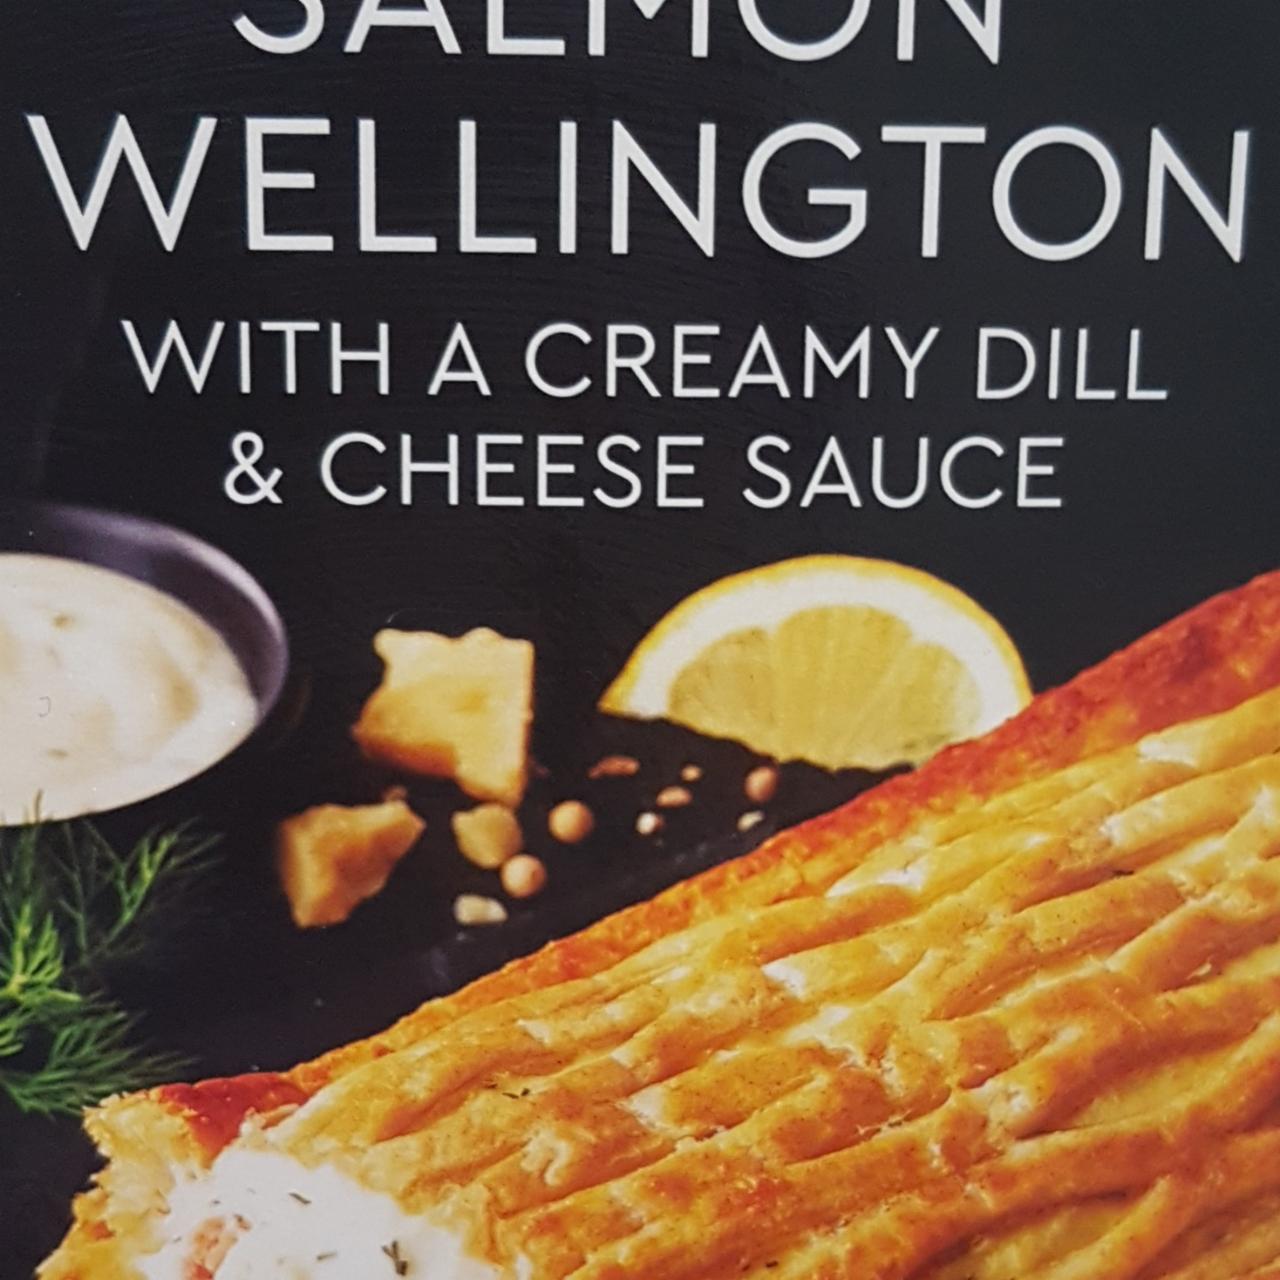 Fotografie - Salmon Wellington with a creamy dill & cheese sauce